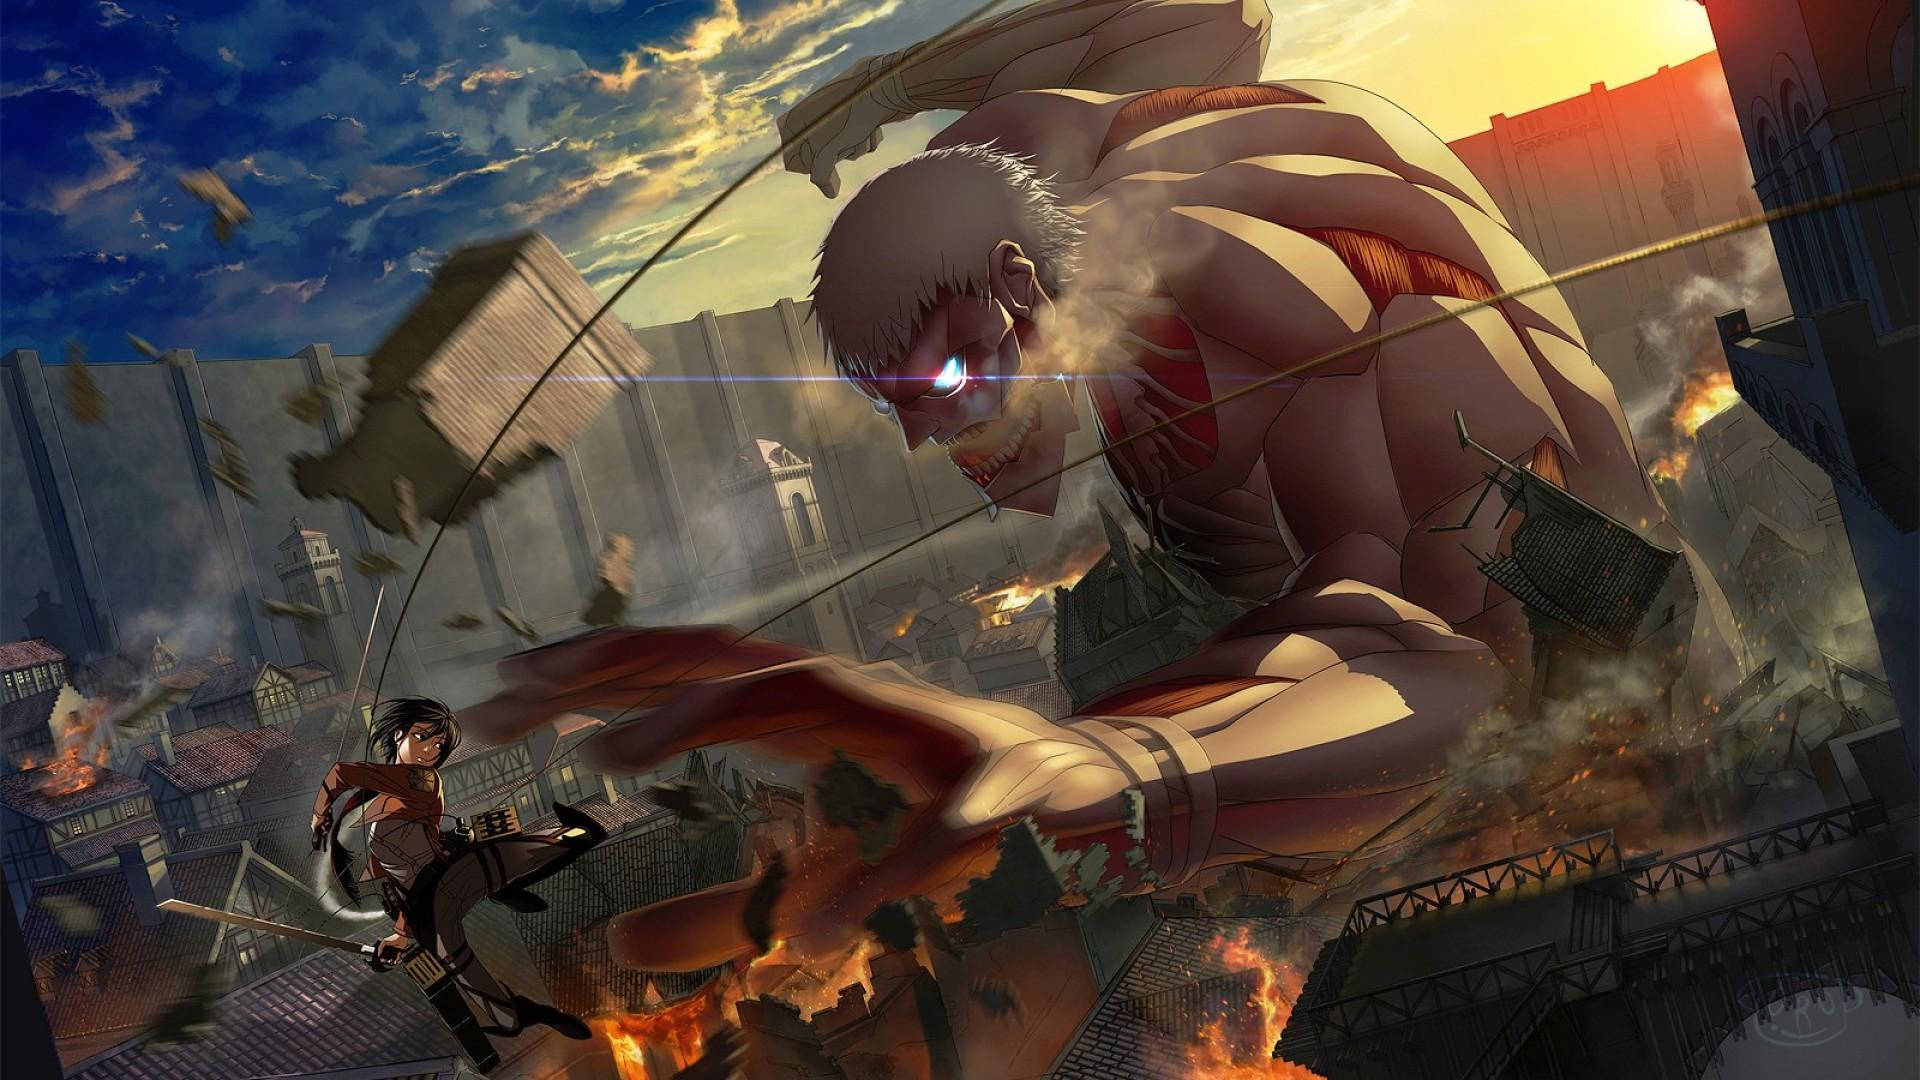 Top 999+ Attack On Titan Season 4 Wallpapers Full HD, 4K✅Free to Use